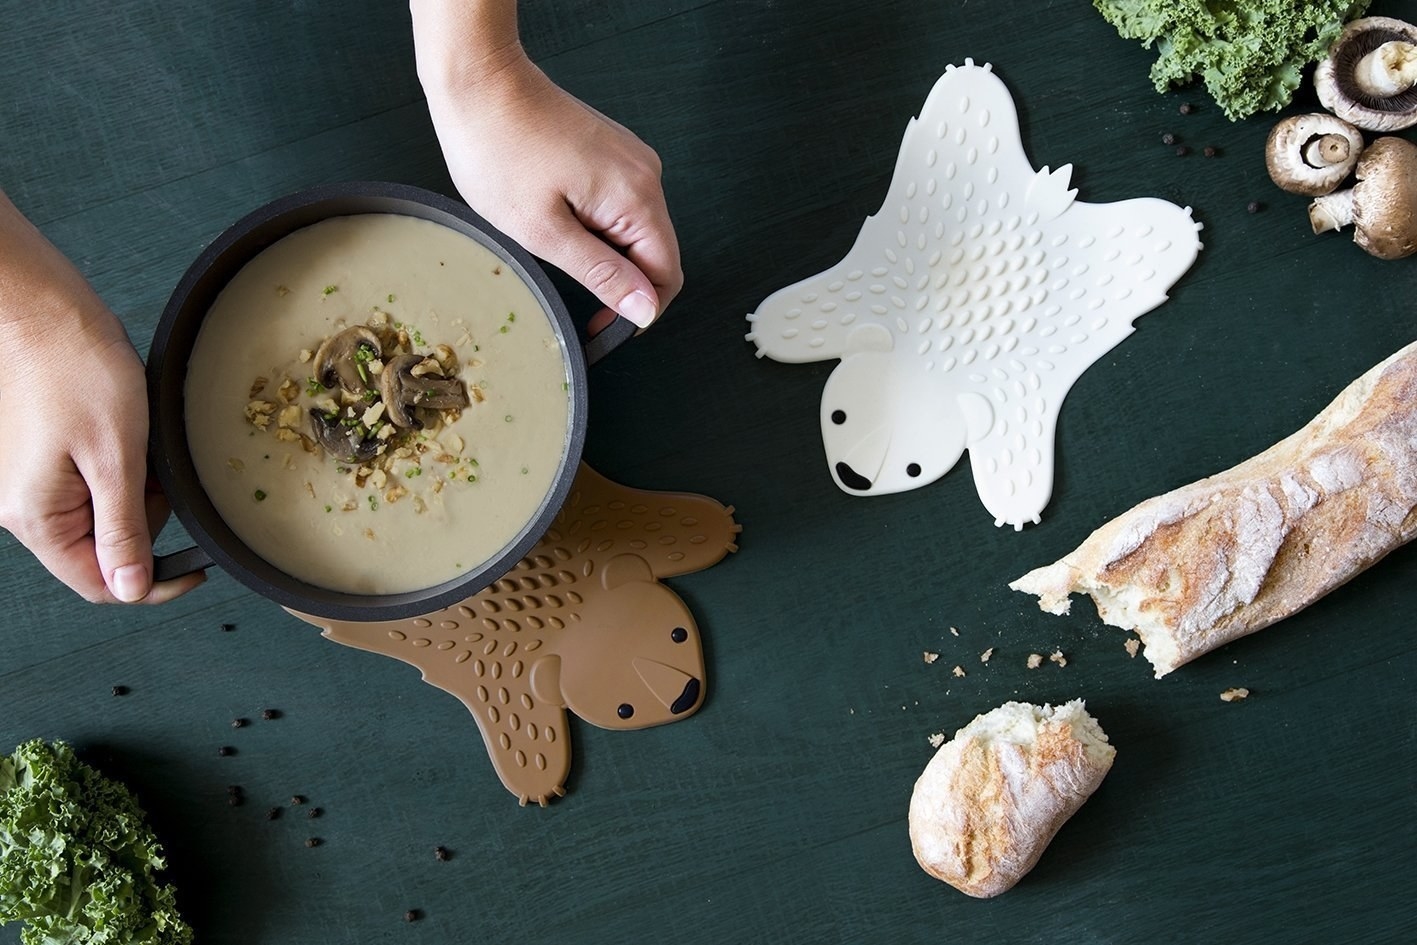 32 Animal-Themed Products That'll Basically Turn Your Kitchen Into